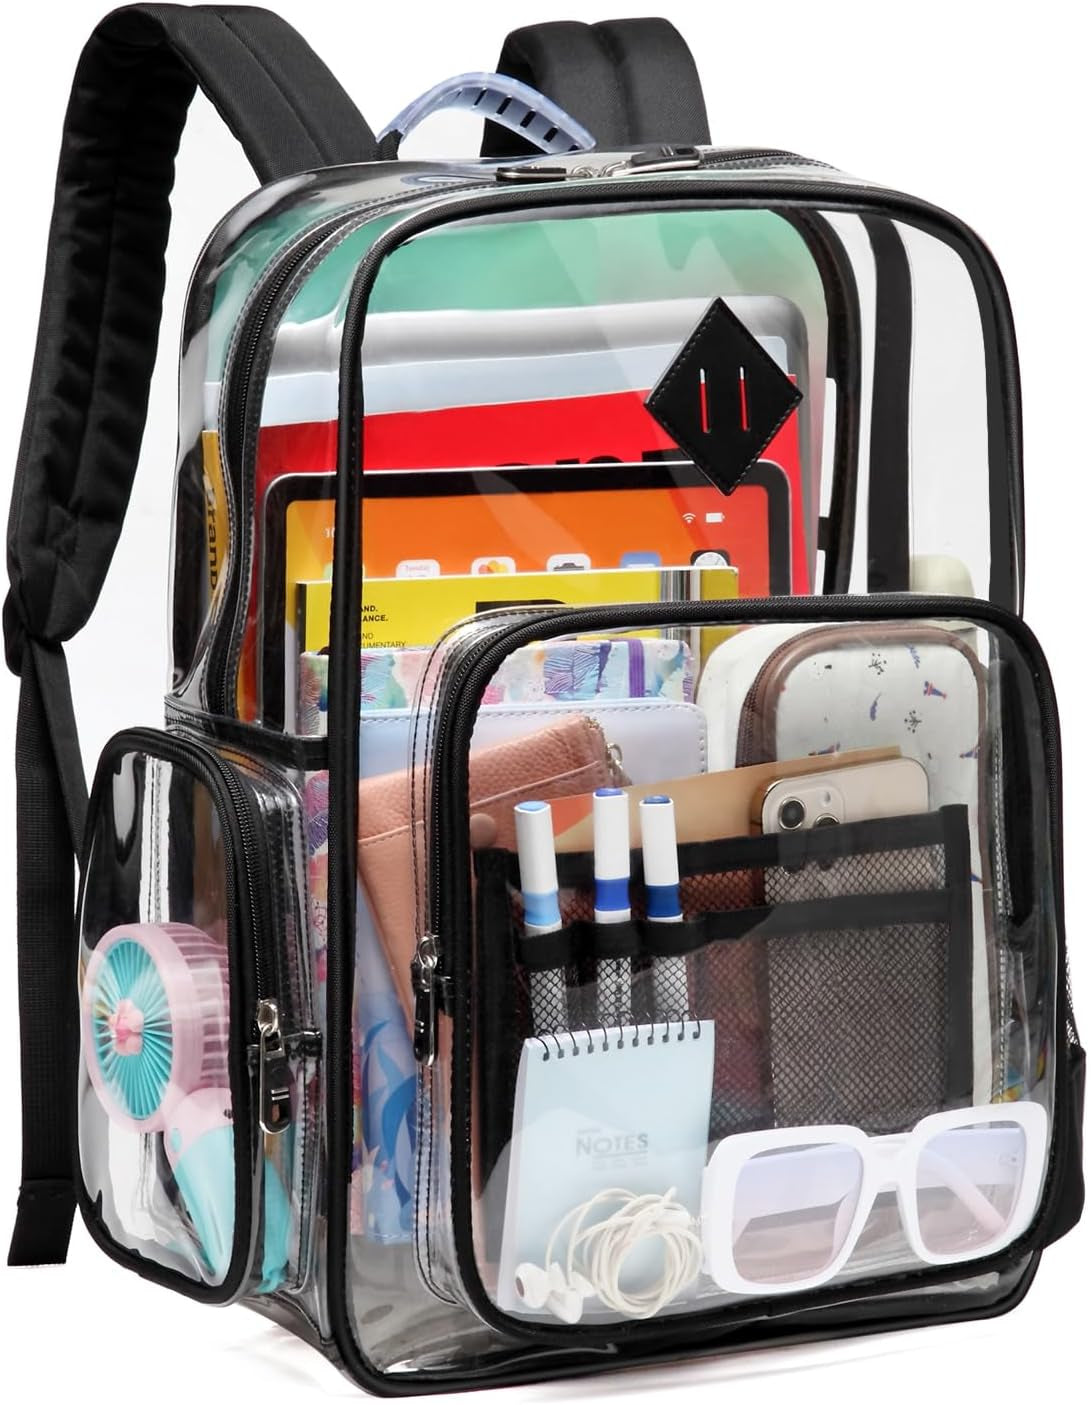 Large Clear Backpack for Men, Heavy Duty PVC Transparent Bookbag for Women Stadium Approved See through Back Pack Fits 16 Inch Laptop for School Work Travel, Gray